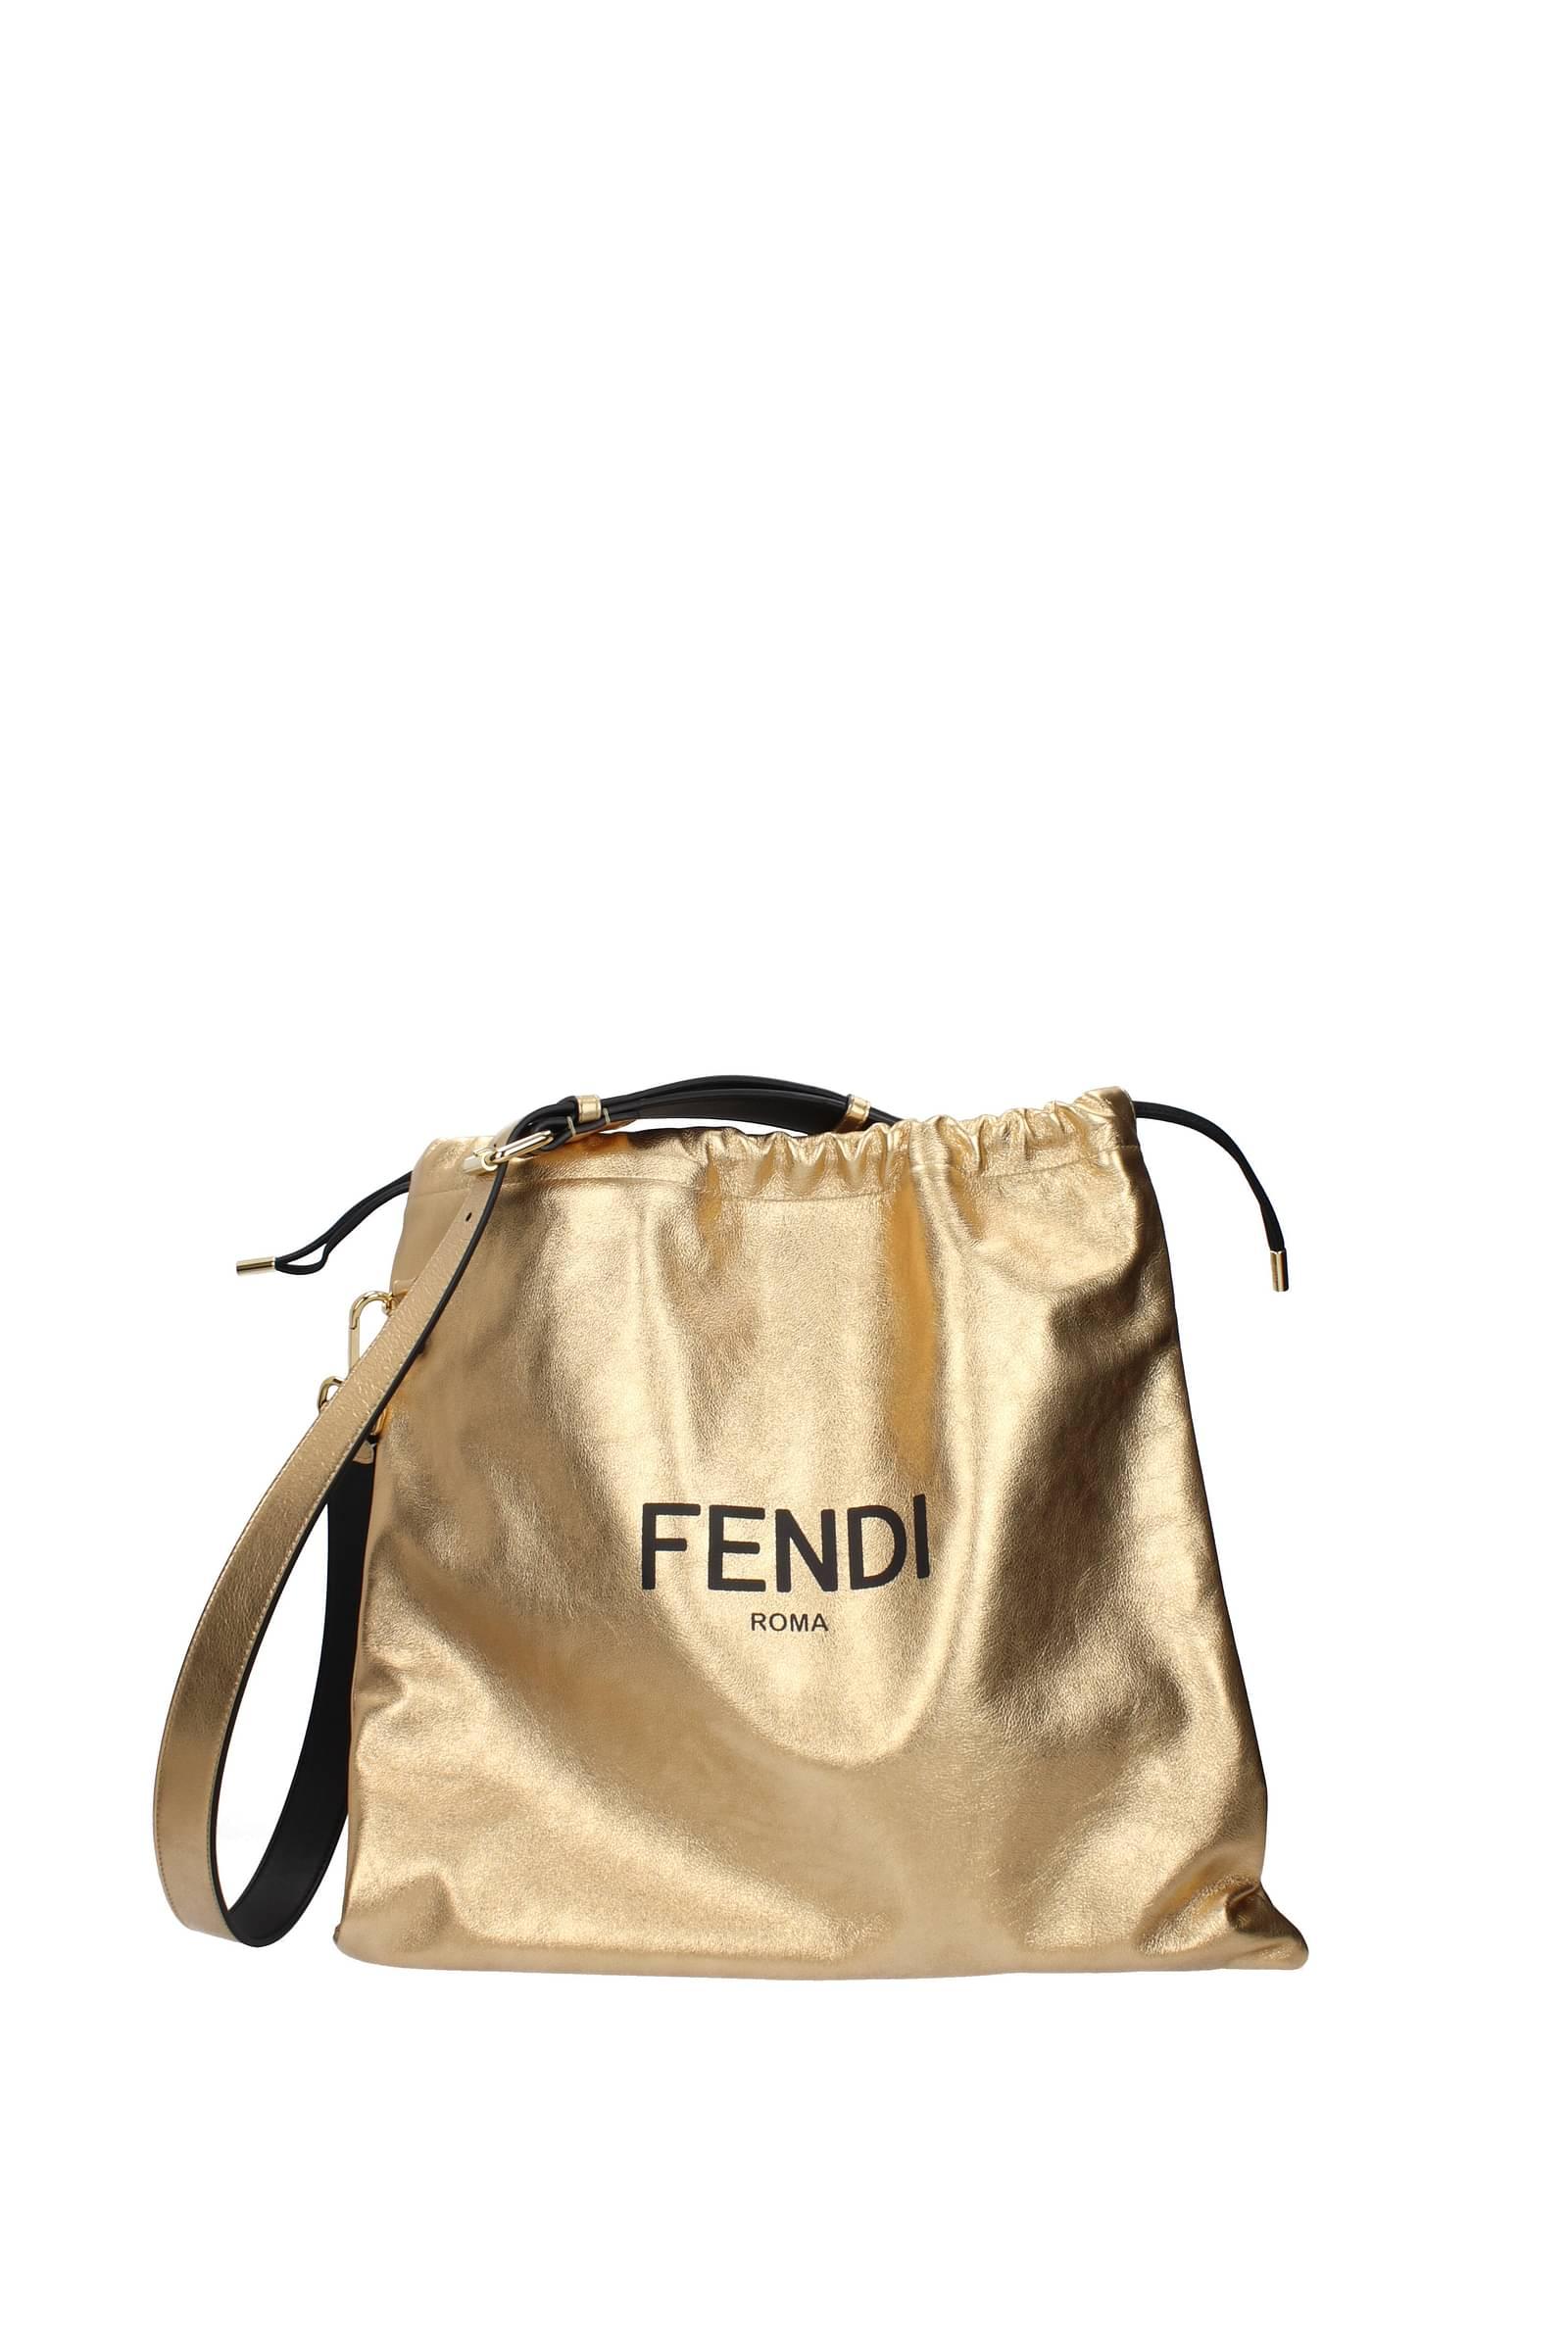 Fendi Crossbody Bag Leather Gold in Natural | Lyst